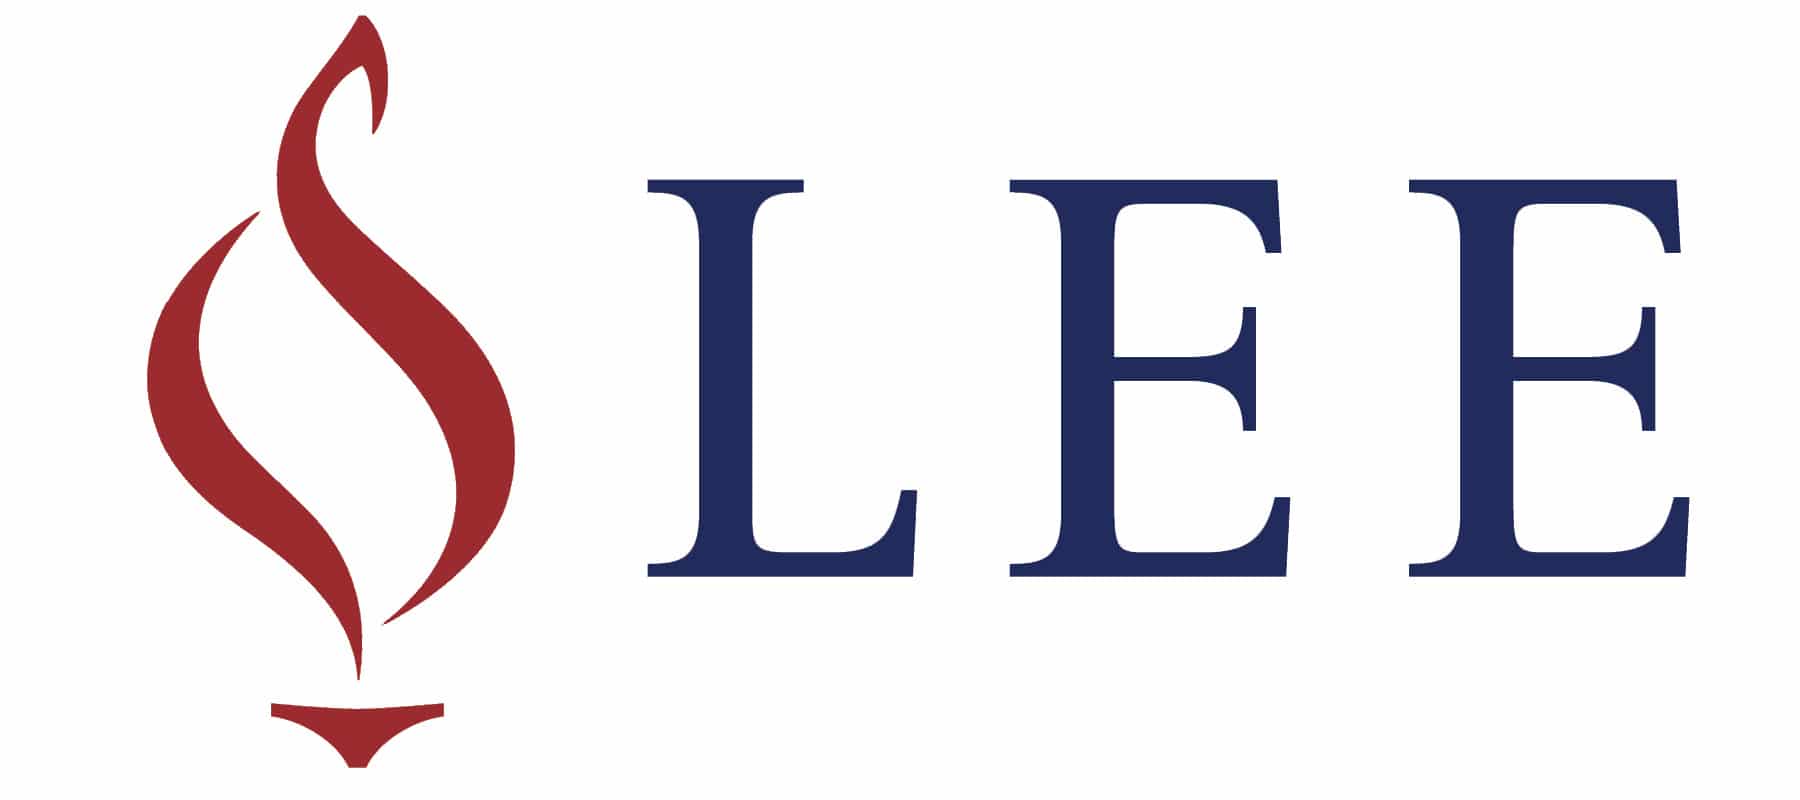 Lee University Tuition: Scholarships and Cost of Living